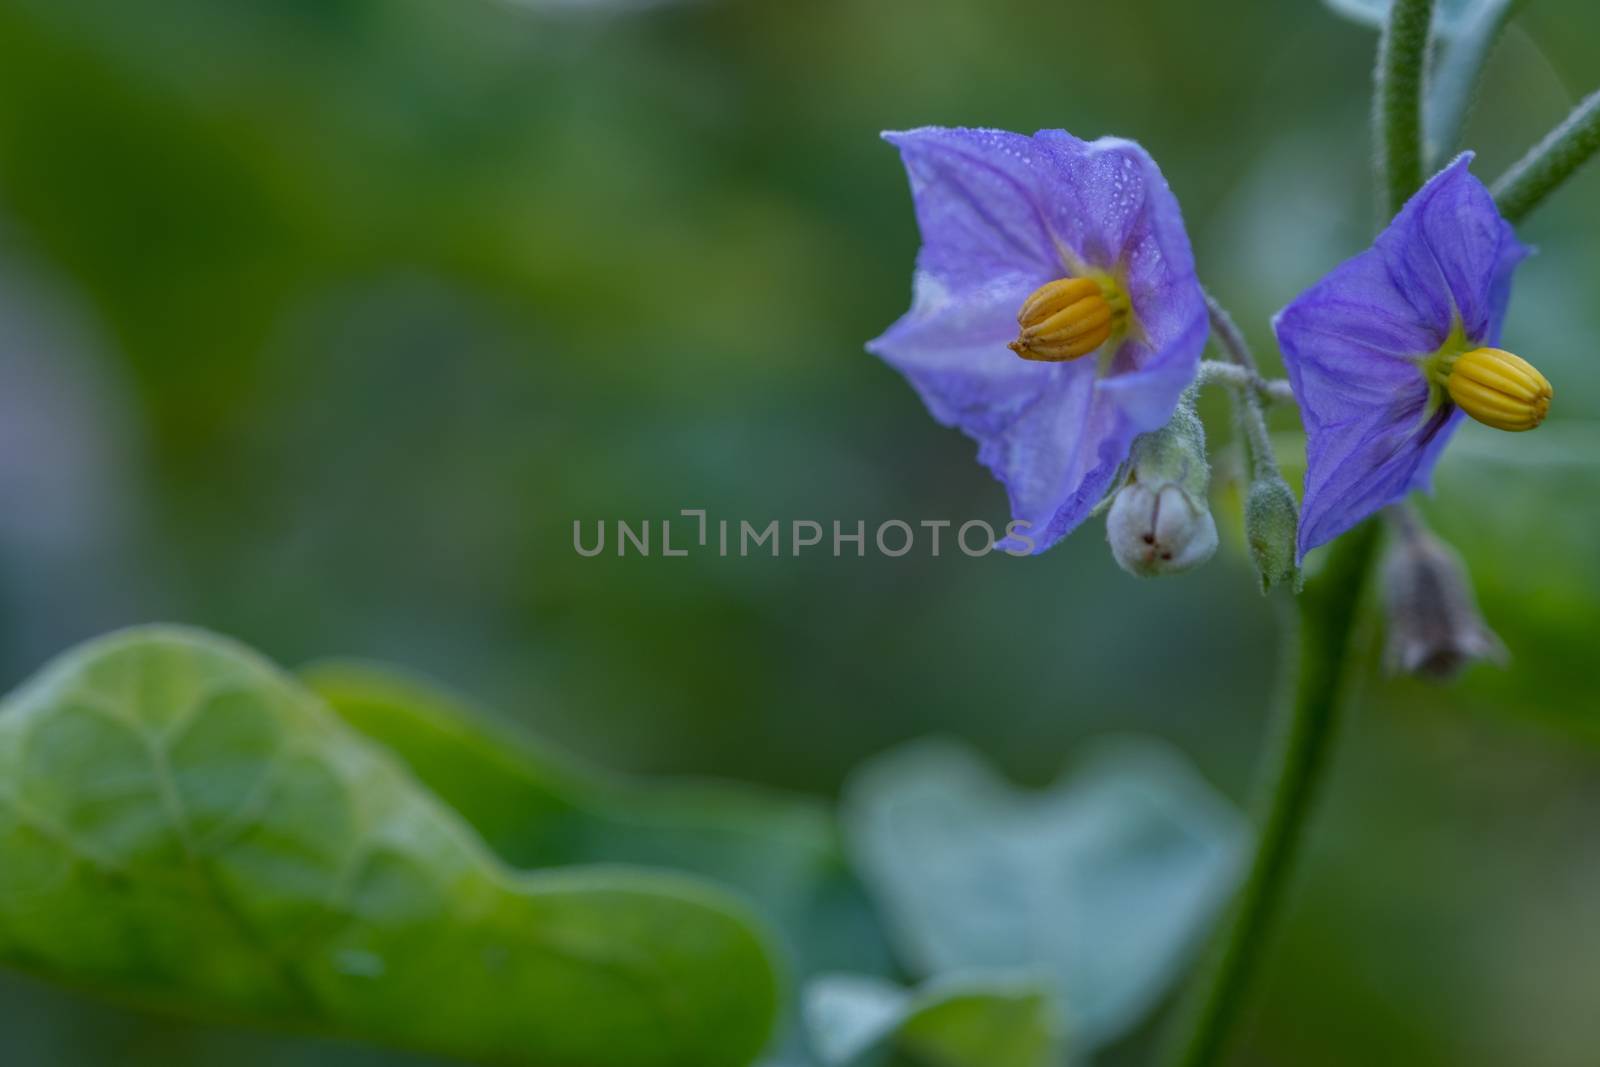 The Select focus Close up Thai Eggplant with flower on green leaf and tree with blur background